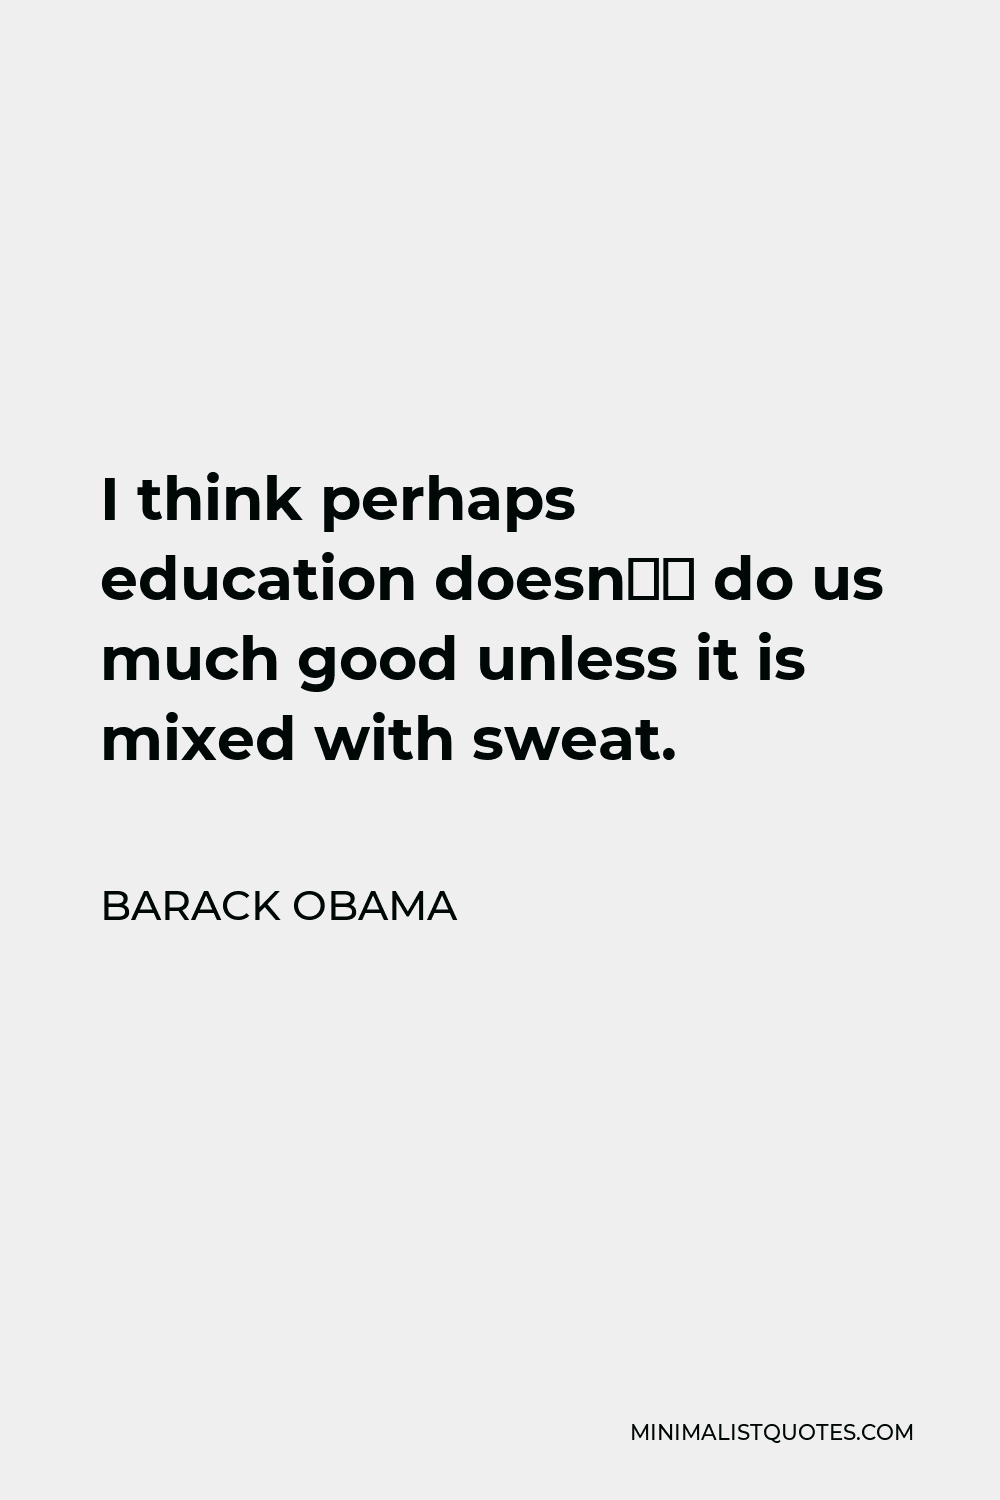 Barack Obama Quote - I think perhaps education doesn’t do us much good unless it is mixed with sweat.